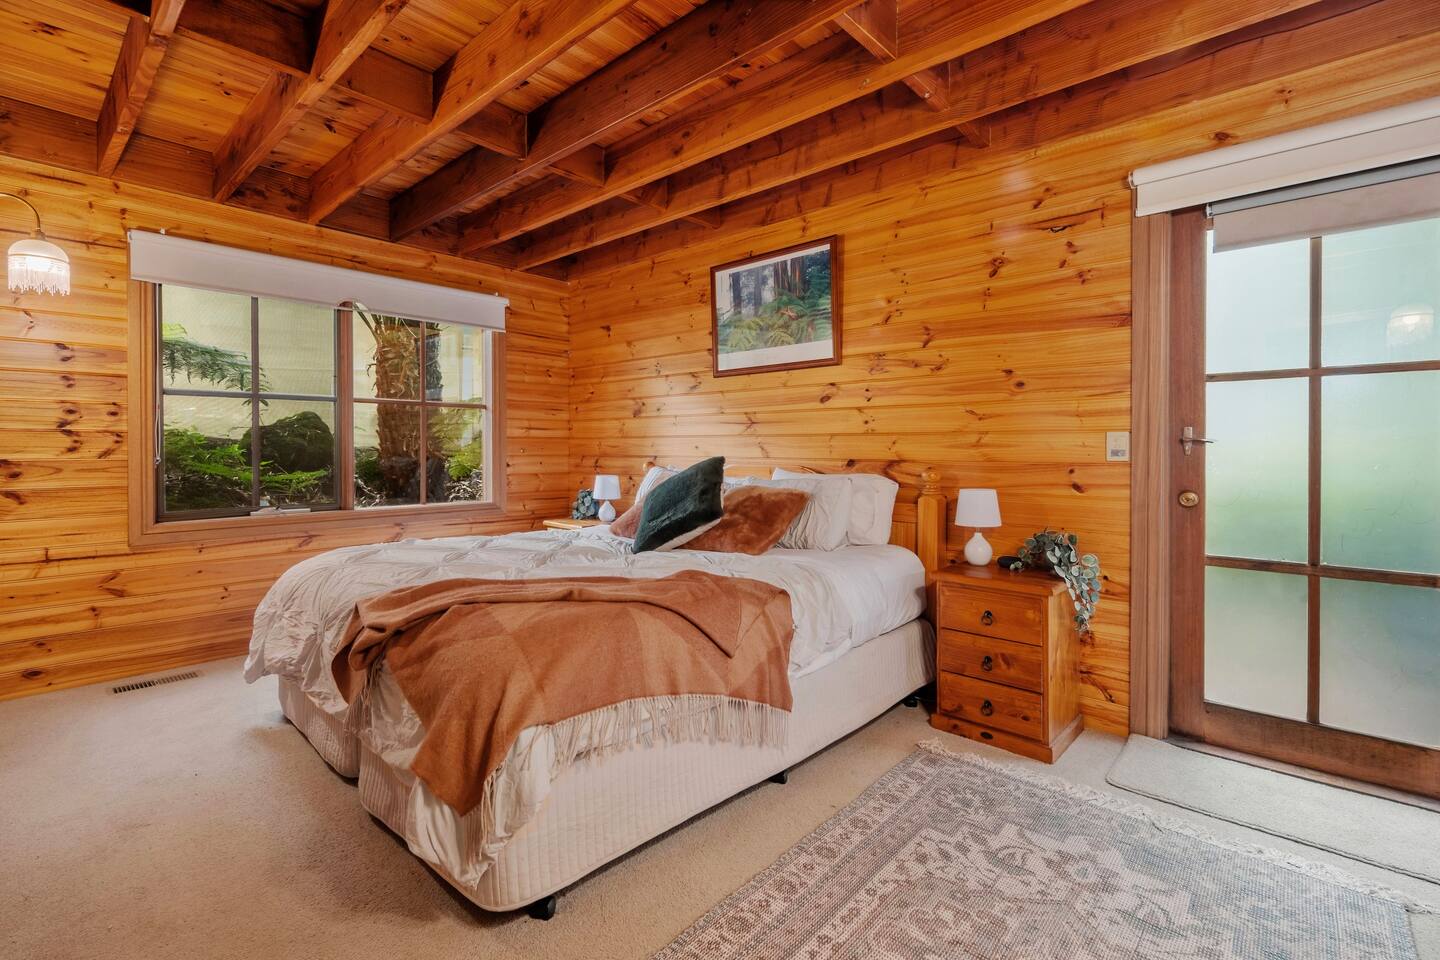 Comfy master bedroom with a queen sized bed and wooden nightstand